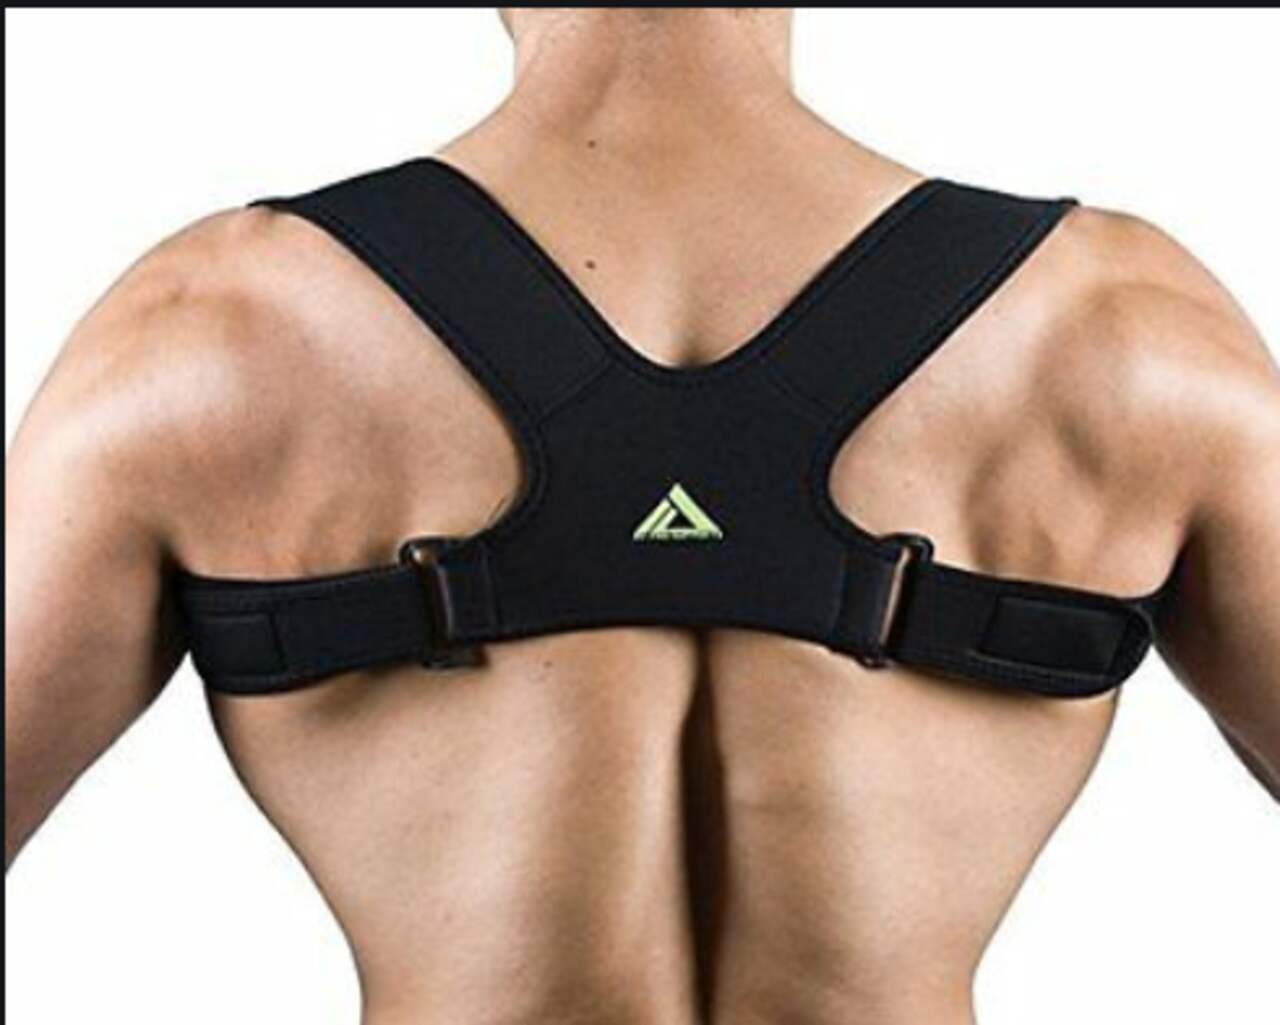 Buy FlexGuard Posture Corrector for Women and Men - Back Brace for Posture,  Adjustable Back Support Straightener Shoulder Posture Support for Pain  Relief, Body Correction, Small/Medium Online at Low Prices in India 